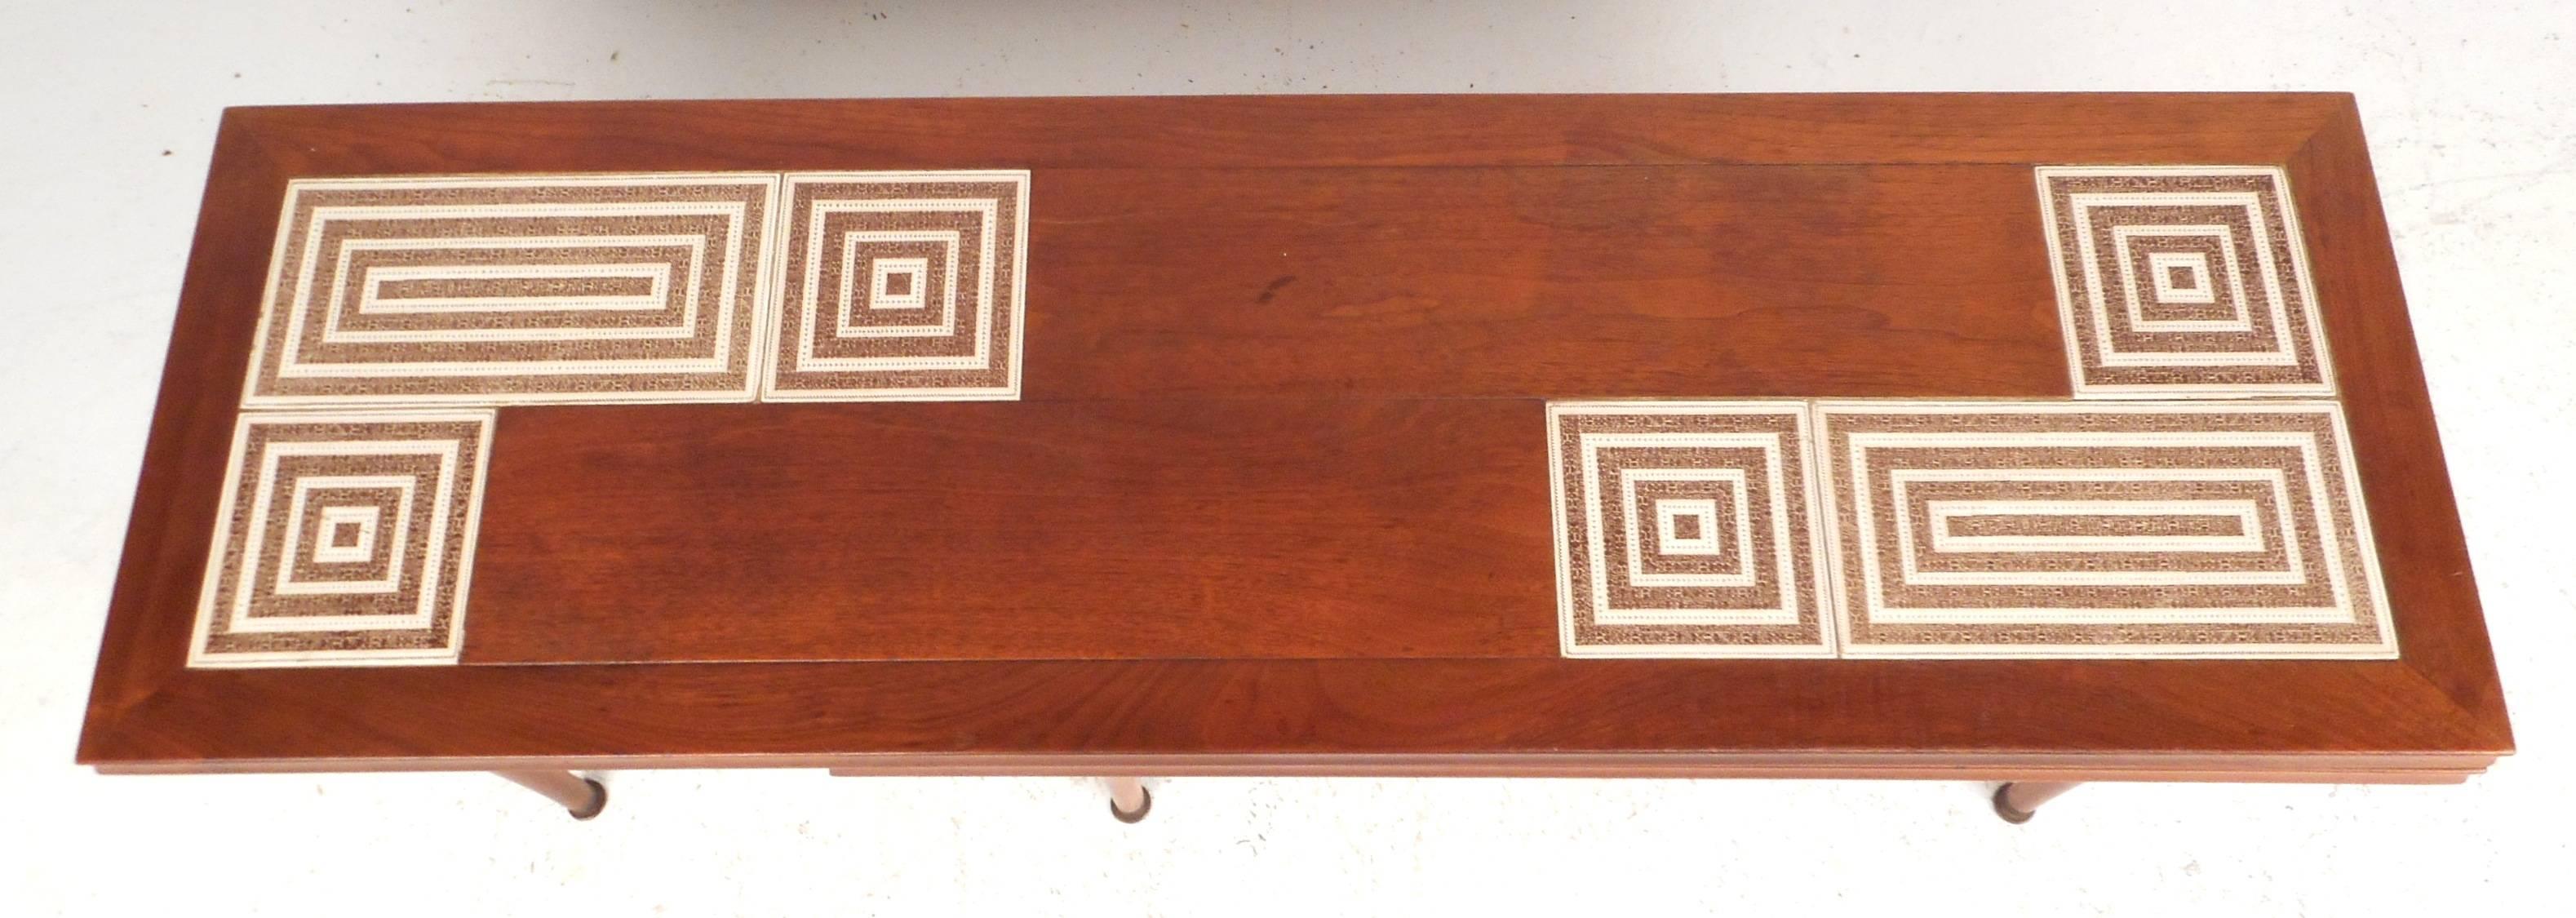 Late 20th Century Mid-Century Modern Tile-Tip Pivot Coffee Table For Sale